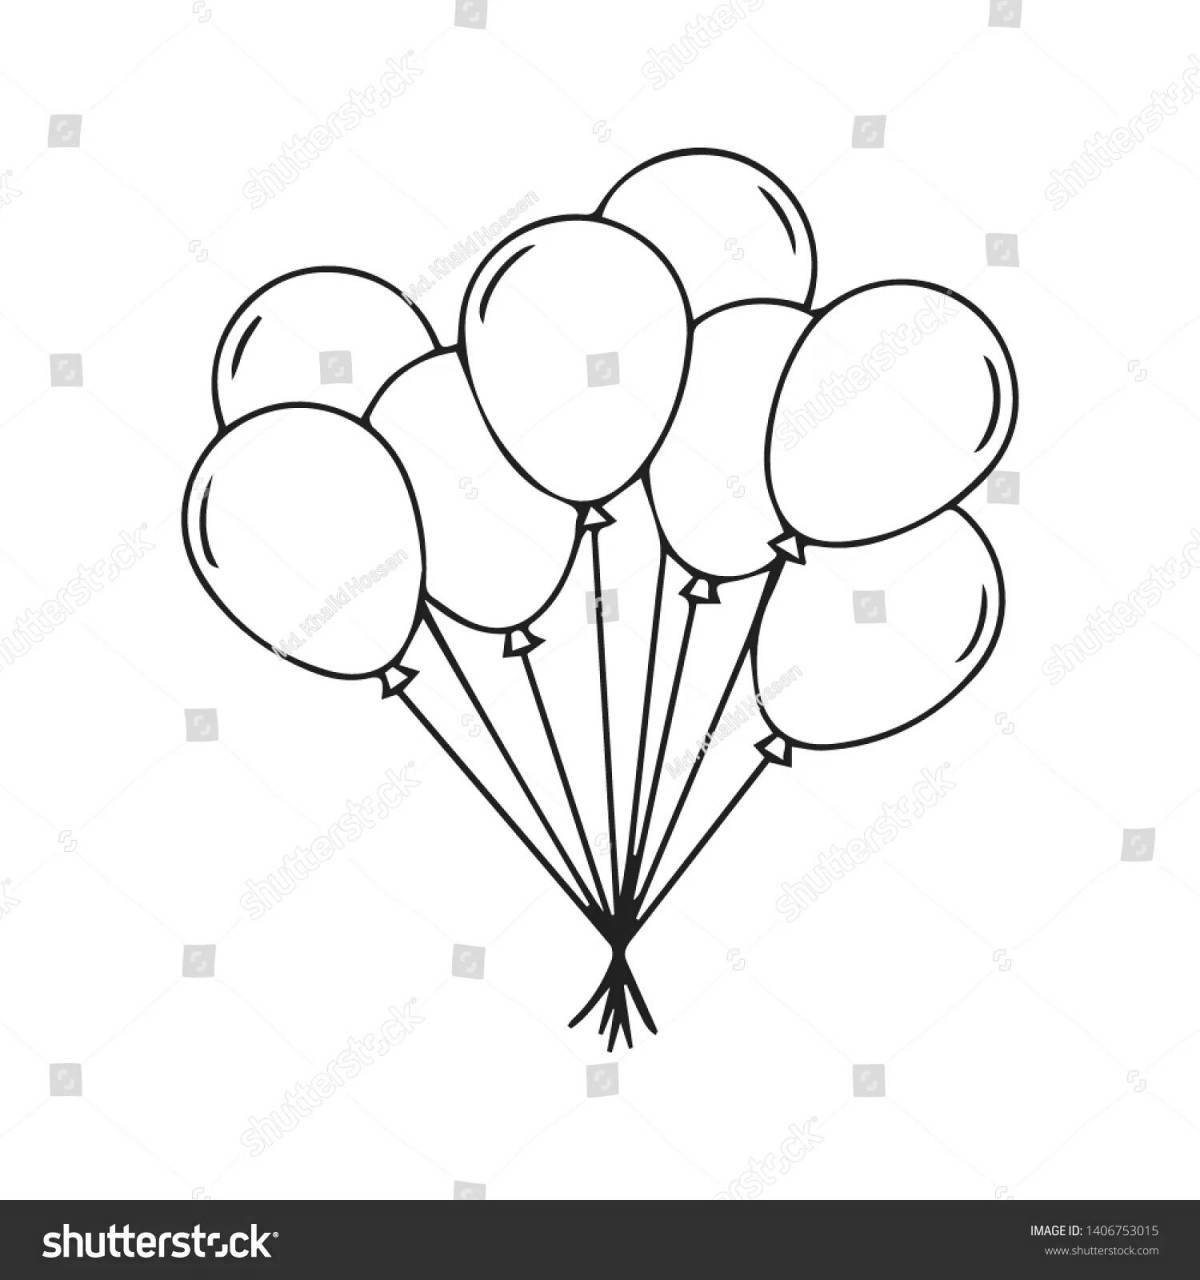 Coloring page gorgeous bunch of balloons